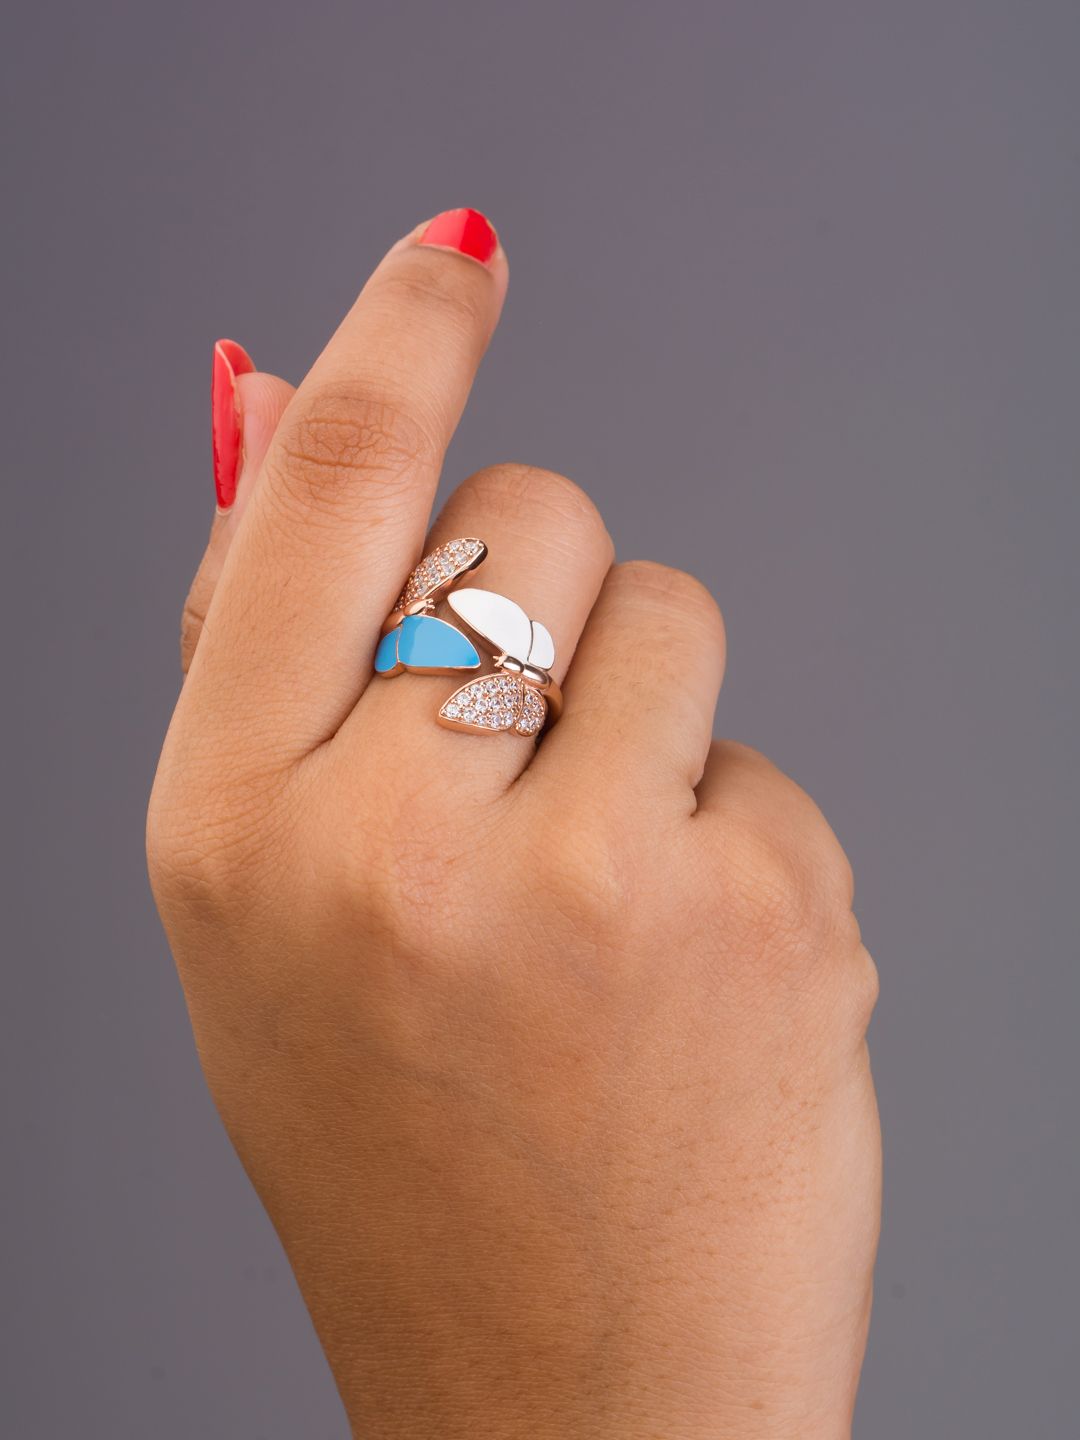 TALISMAN Rose Gold-Plated Handcrafted Embedded White CZ-Stones Butterflies-Shaped Ring Price in India